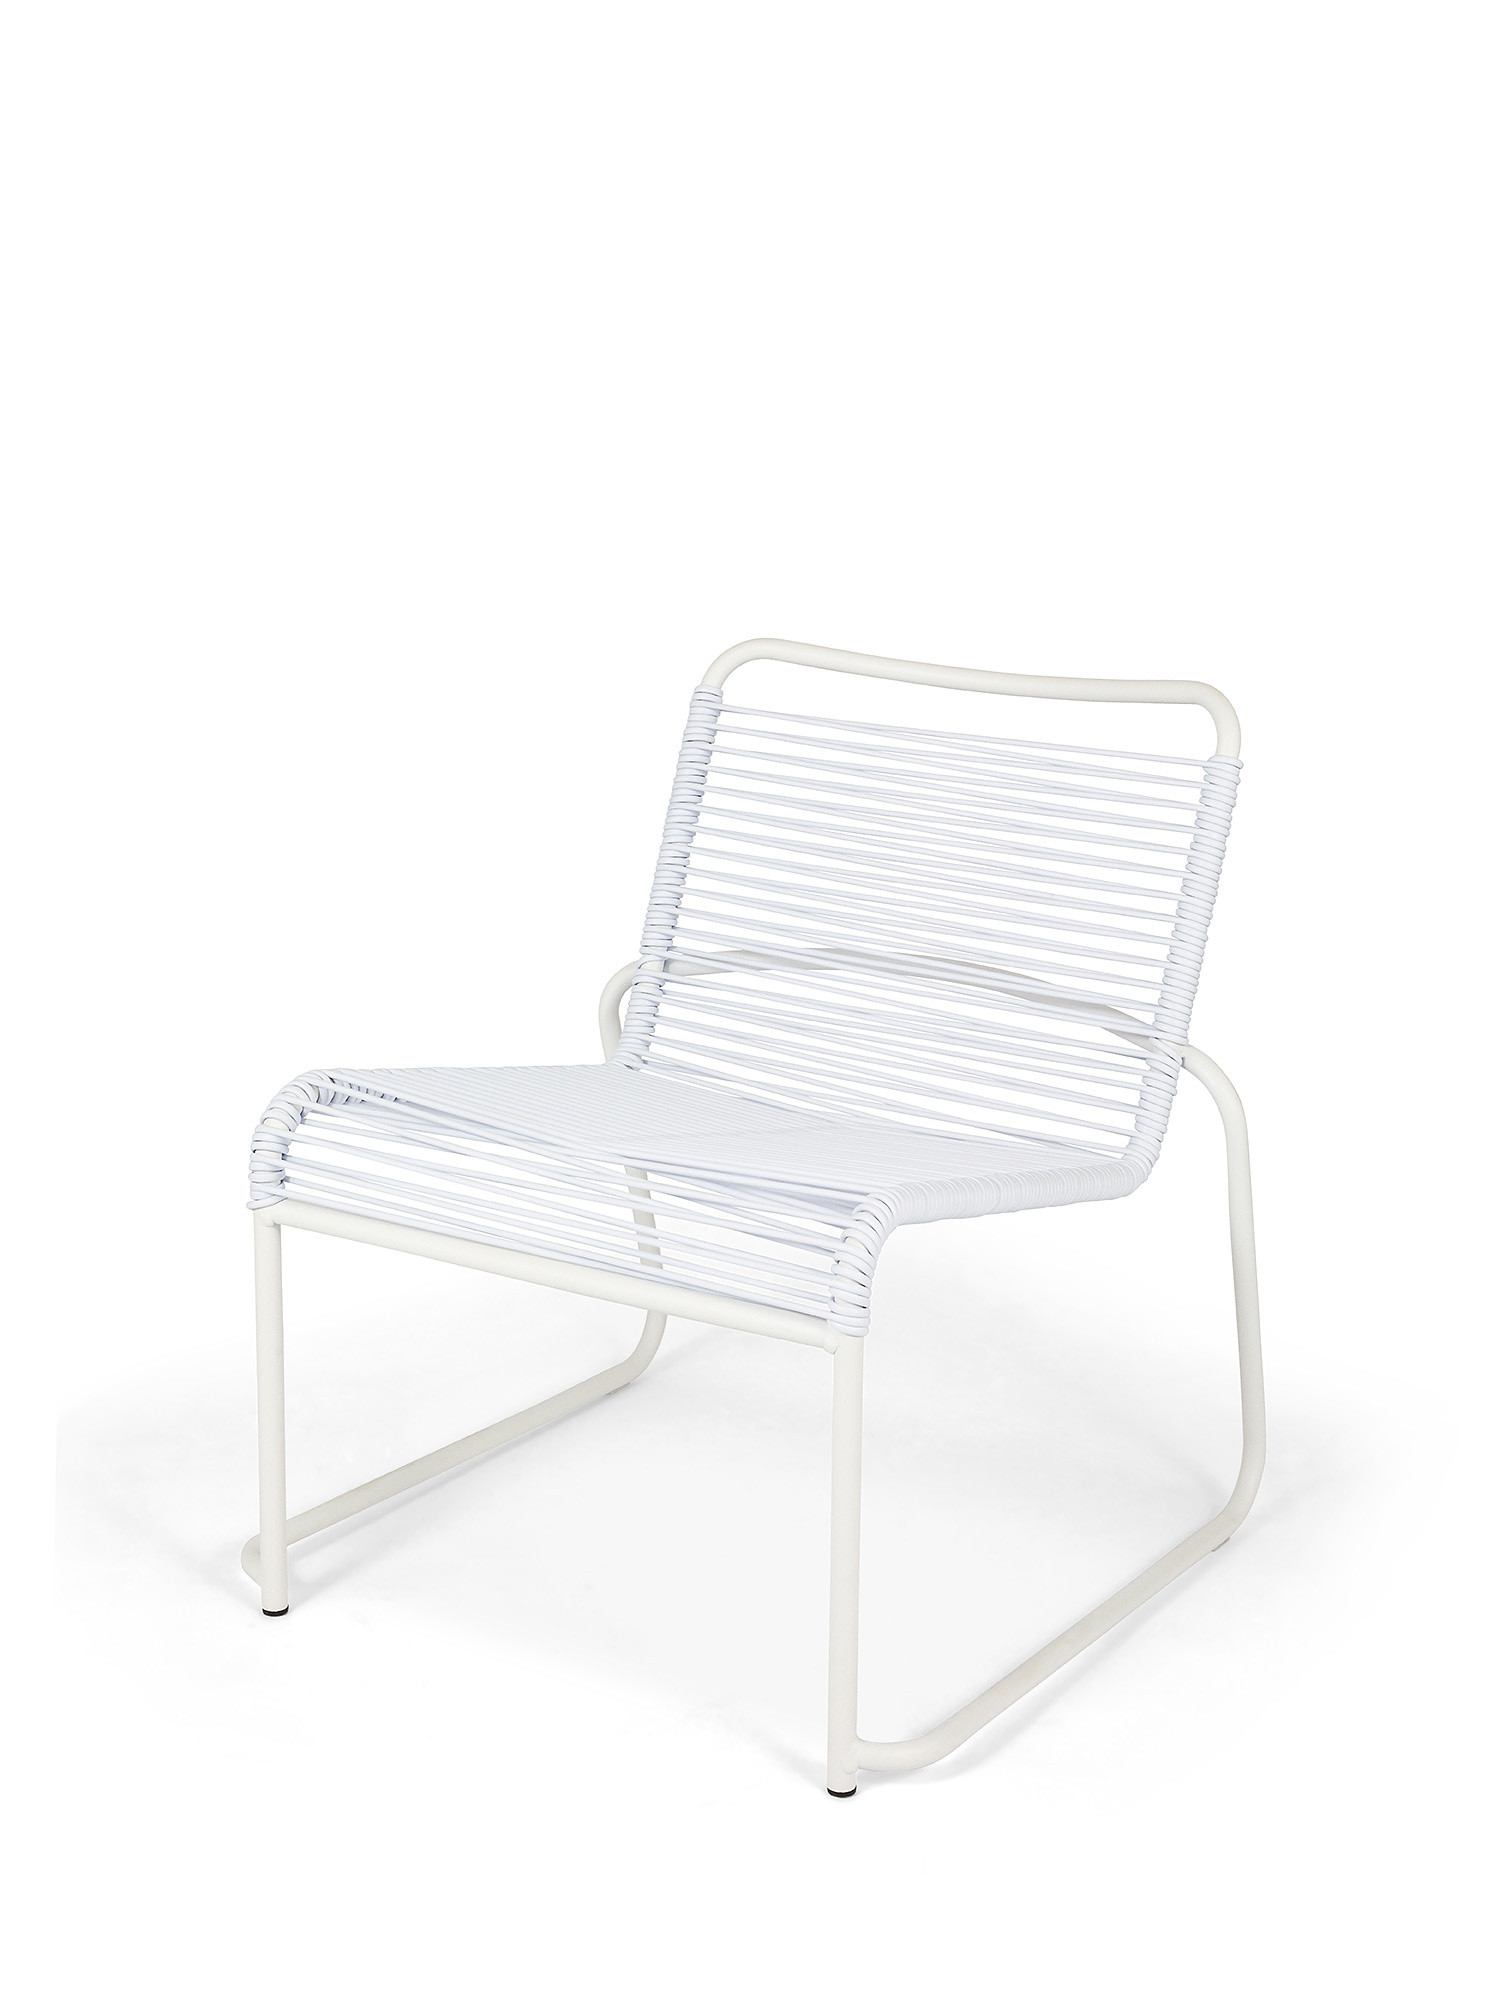 Fiam - Outdoor armchair in aluminum and PVC Lido, Grey, large